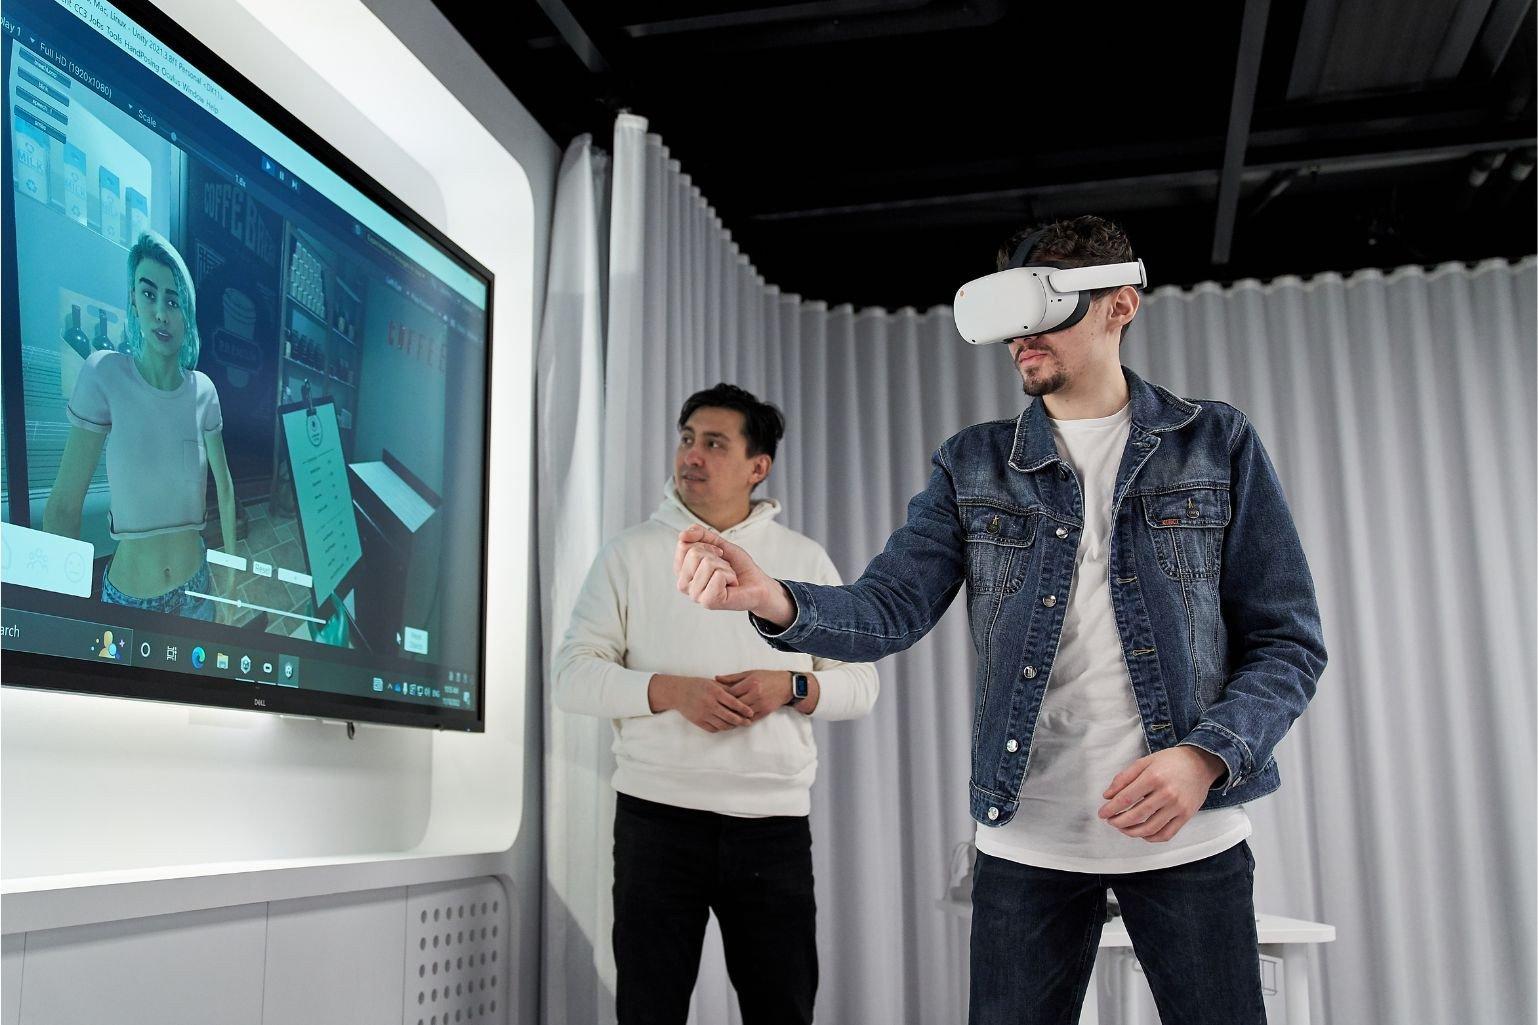 A man wearing a virtual reality (VR) headset standing in front of a TV screen. His hand is outstretched, controlling an animation of a woman on the screen using the VR technology. Another man is standing in the background, watching the screen and the participant's VR control.